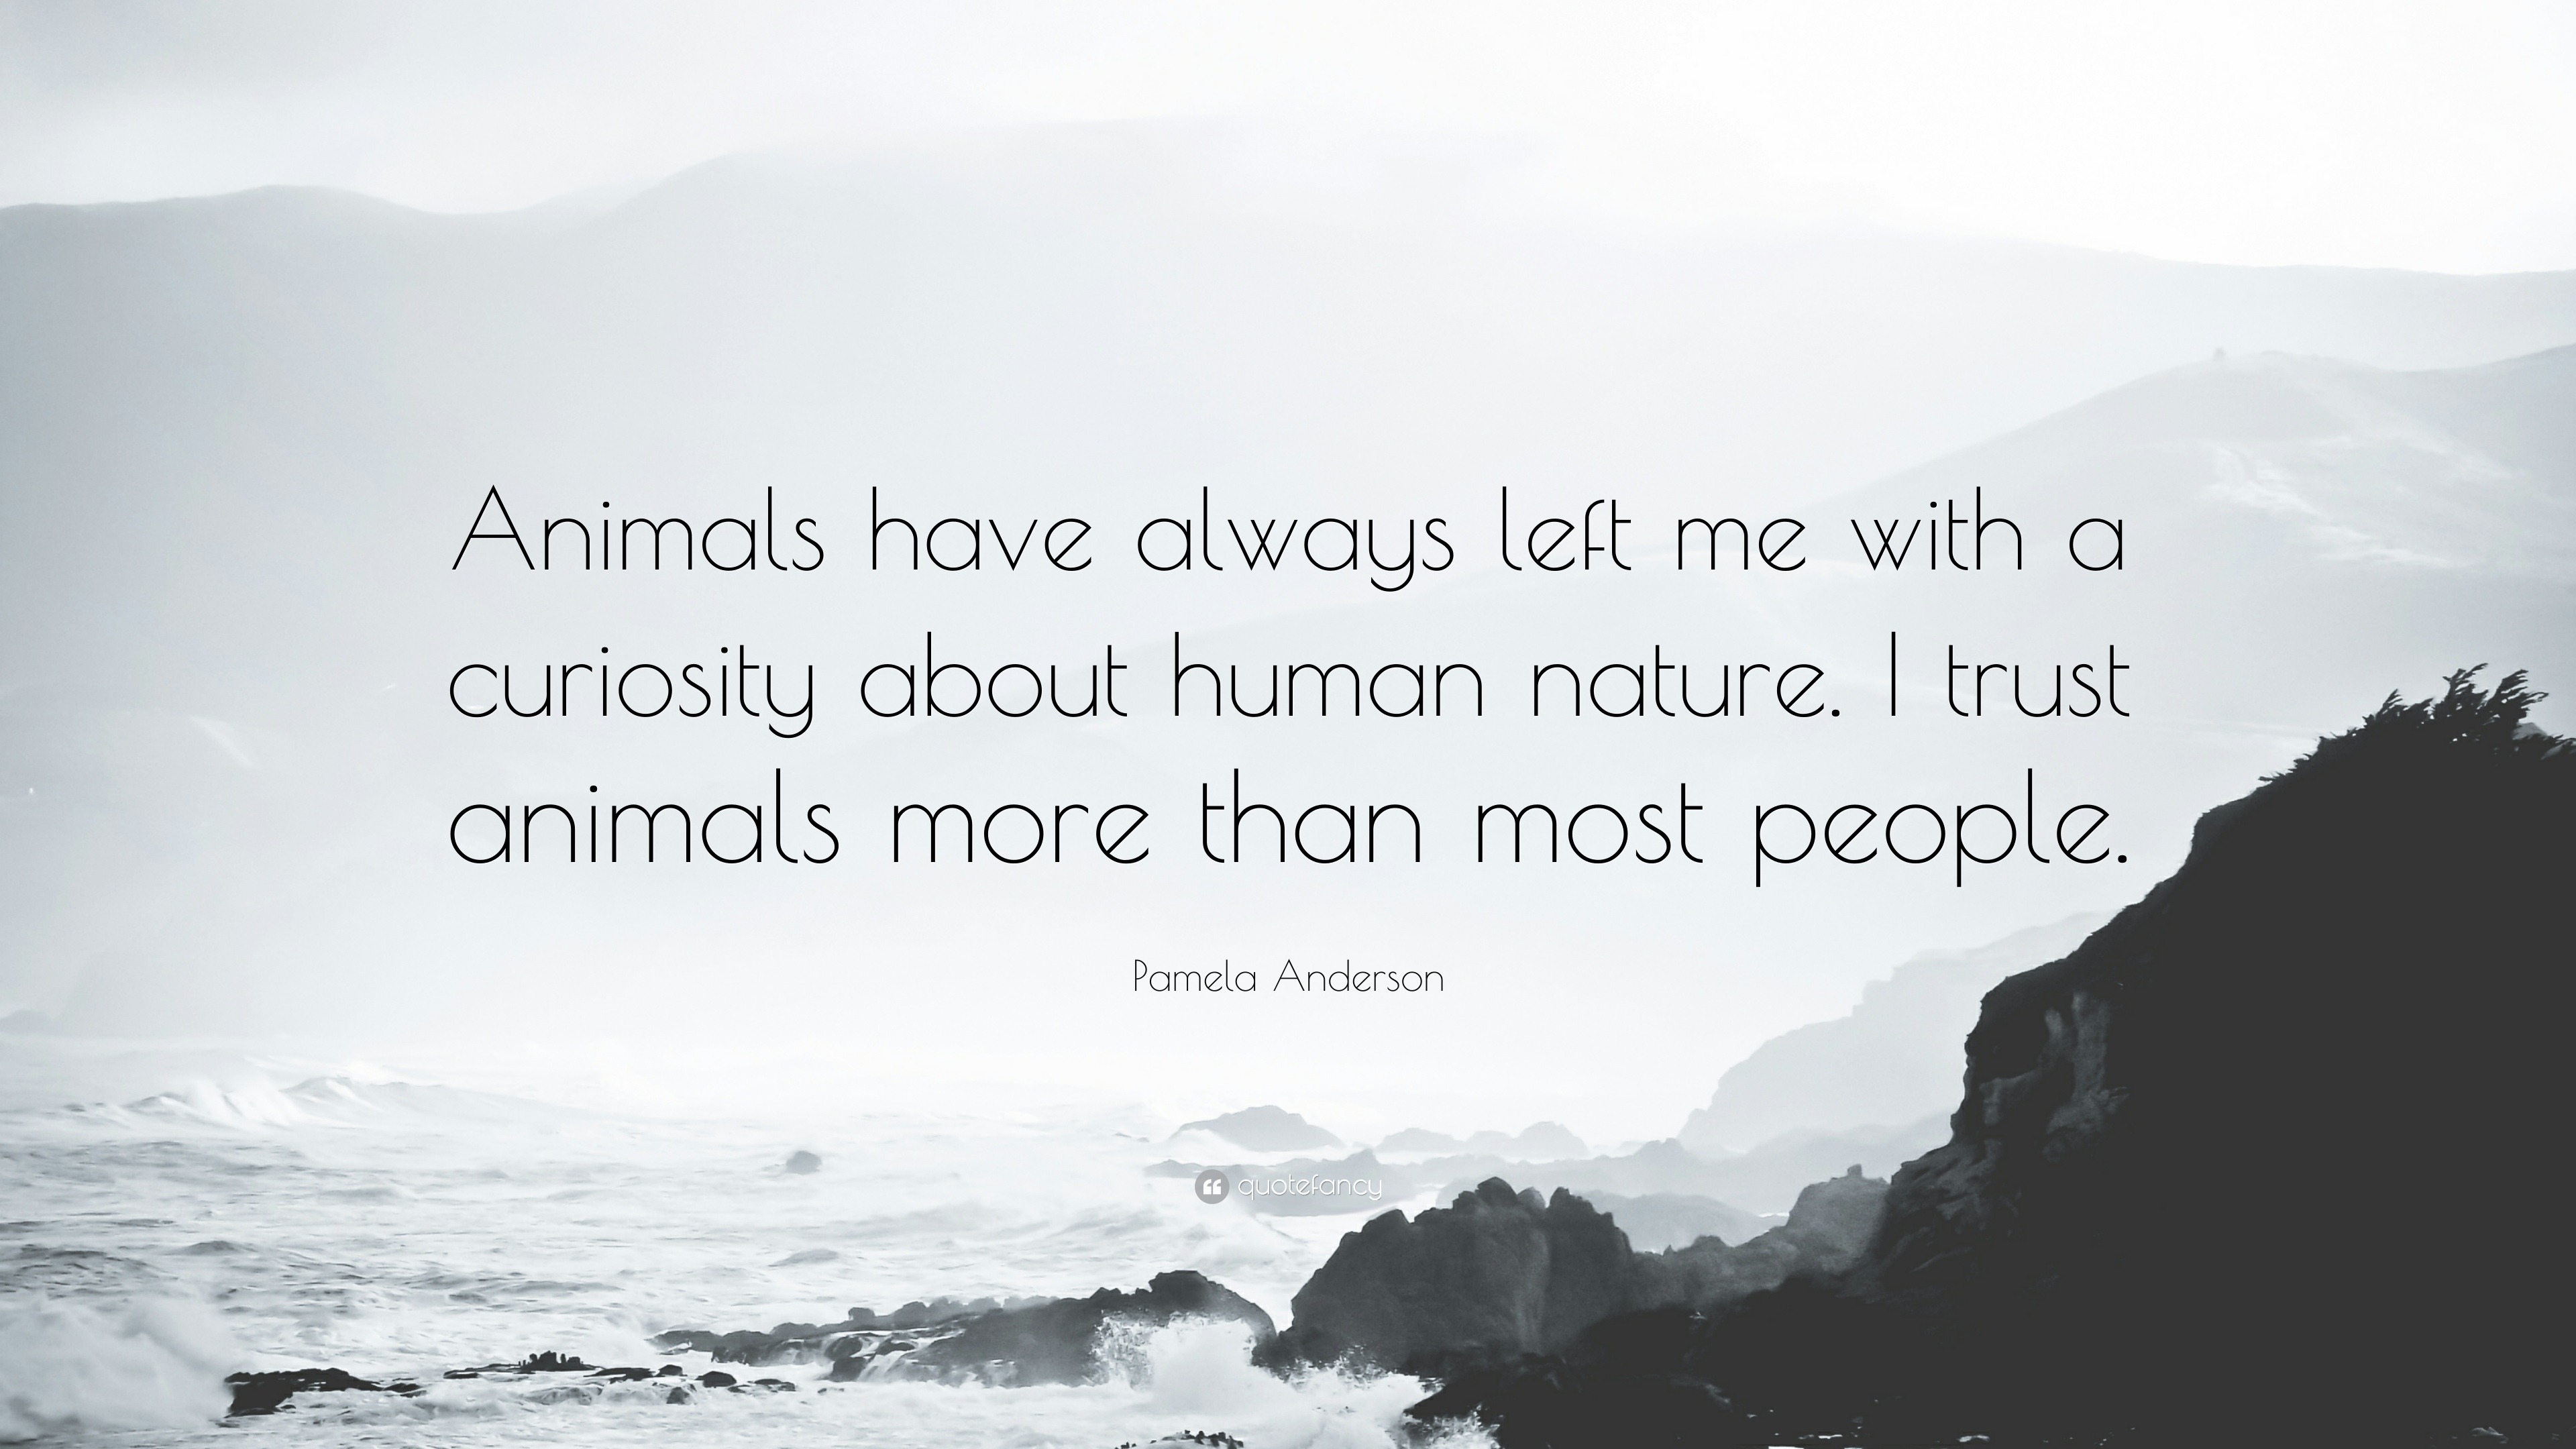 Pamela Anderson Quote: “Animals have always left me with a curiosity about  human nature. I trust